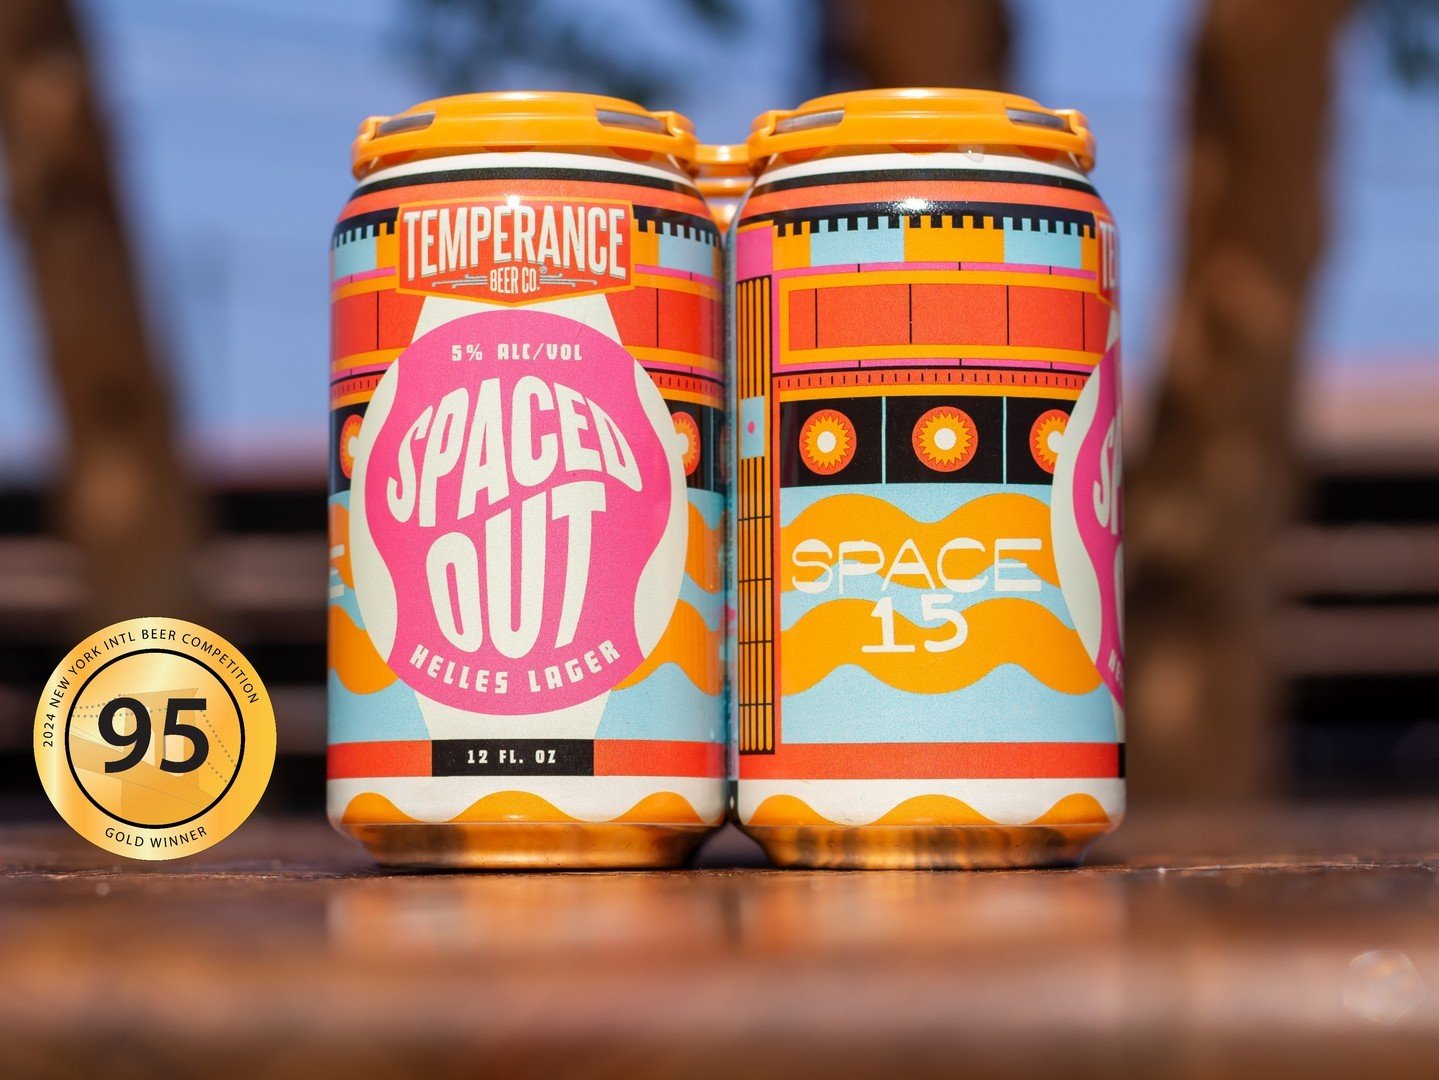 🎉 We did it, folks! 🎉 Temperance Beer Co. is thrilled to announce our big wins at the 13th Annual New York International Beer Competition! 🍻 

🥇 Spaced Out: Gold Medal
🥈 Basement Party: Silver Medal
🥉 Greenwood Beach: Bronze Medal

This prestig